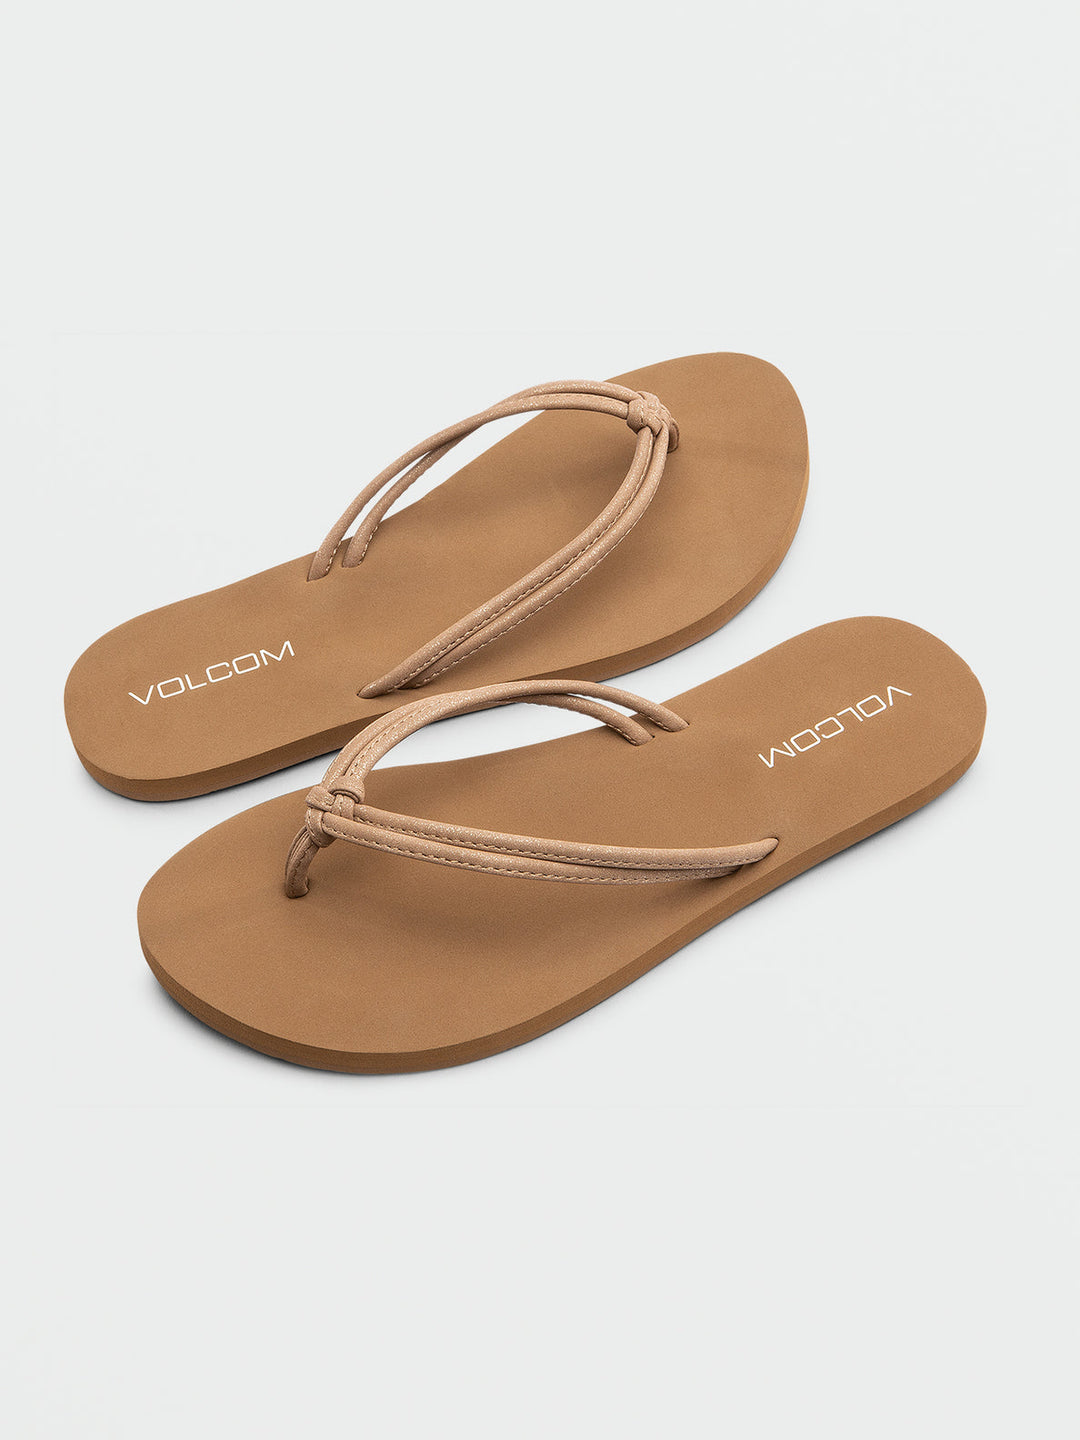 VOLCOM FOREVER AND EVER II WOMENS SANDAL - TAN